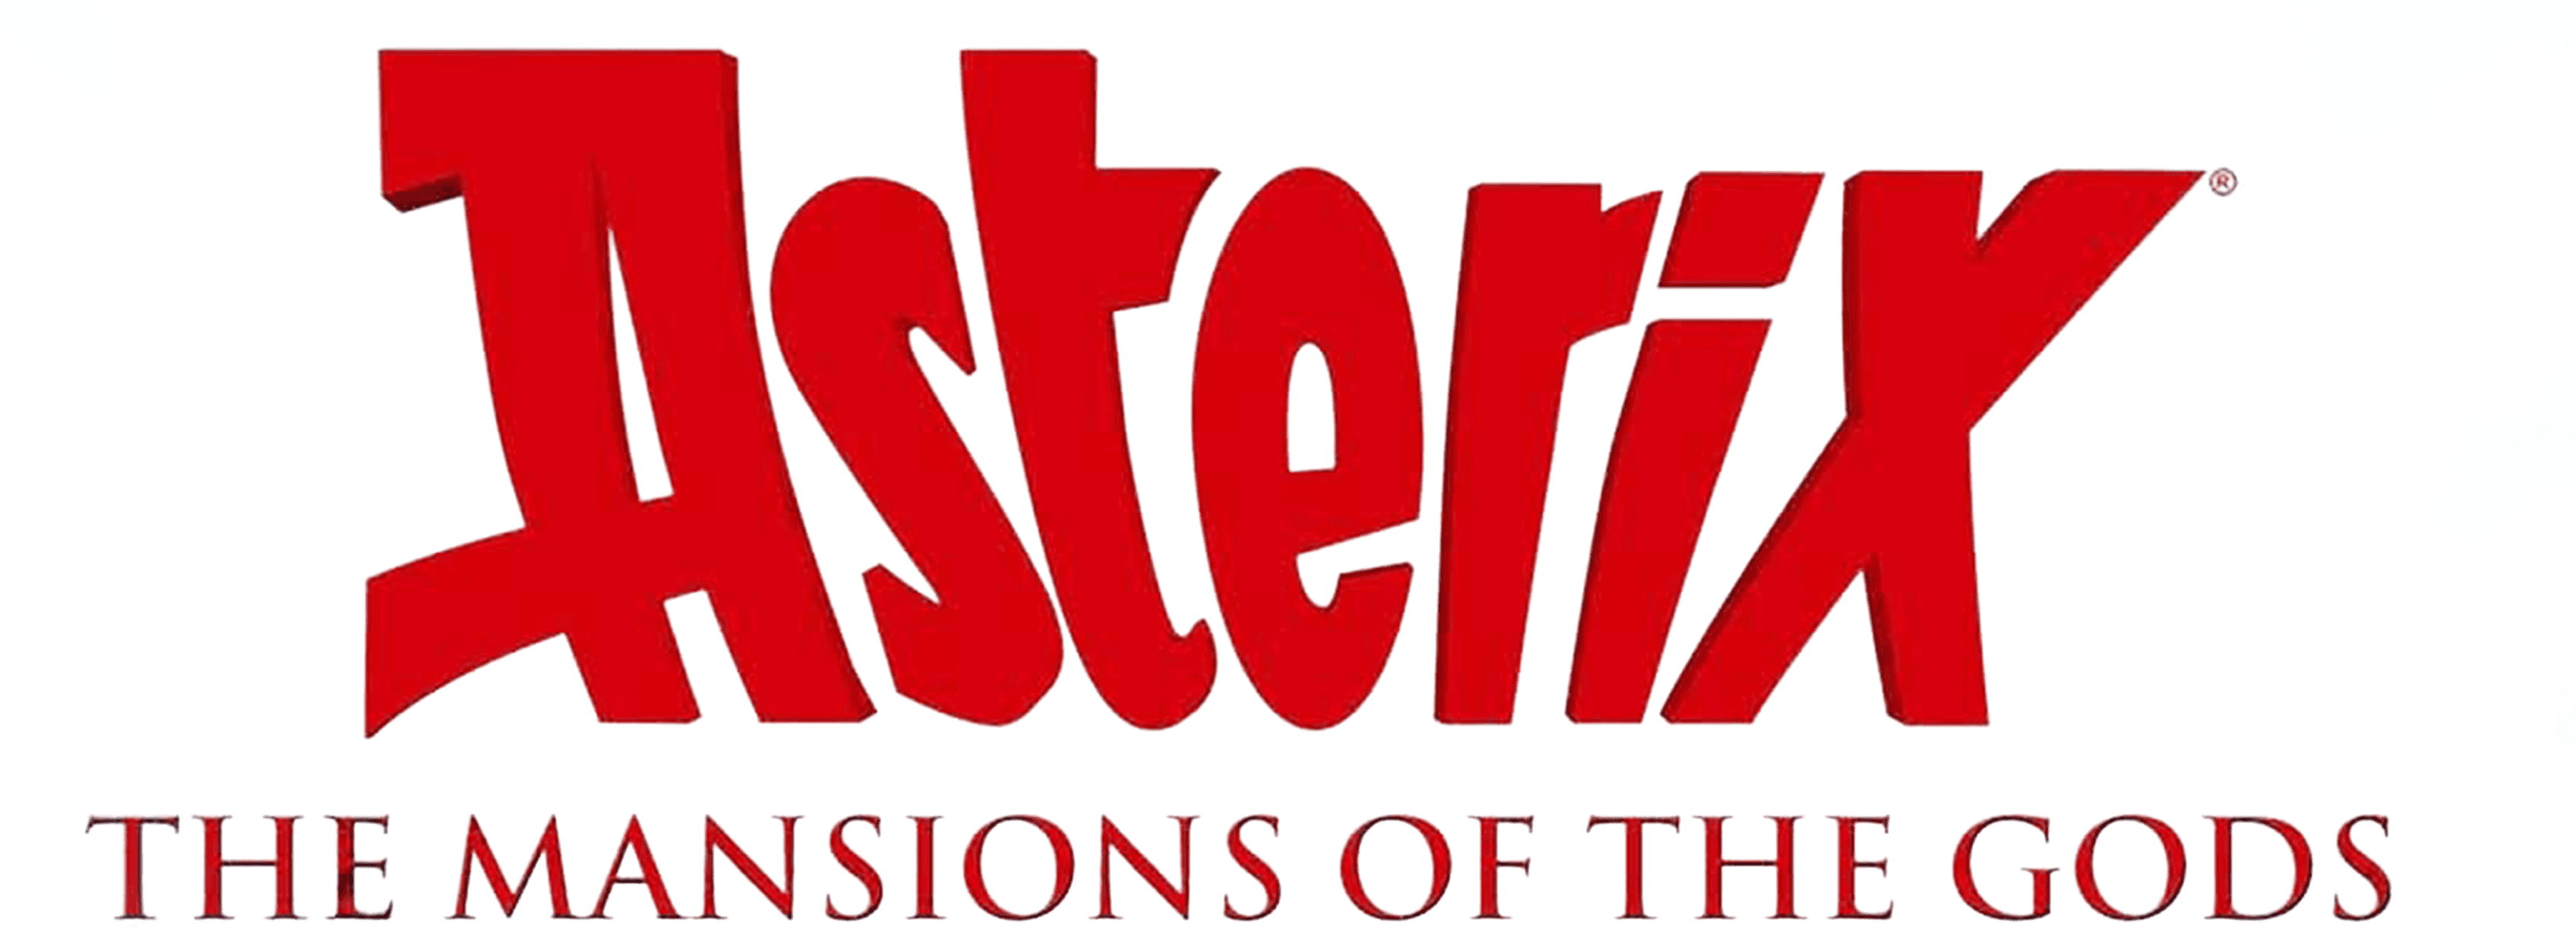 Asterix: The Mansions of the Gods logo